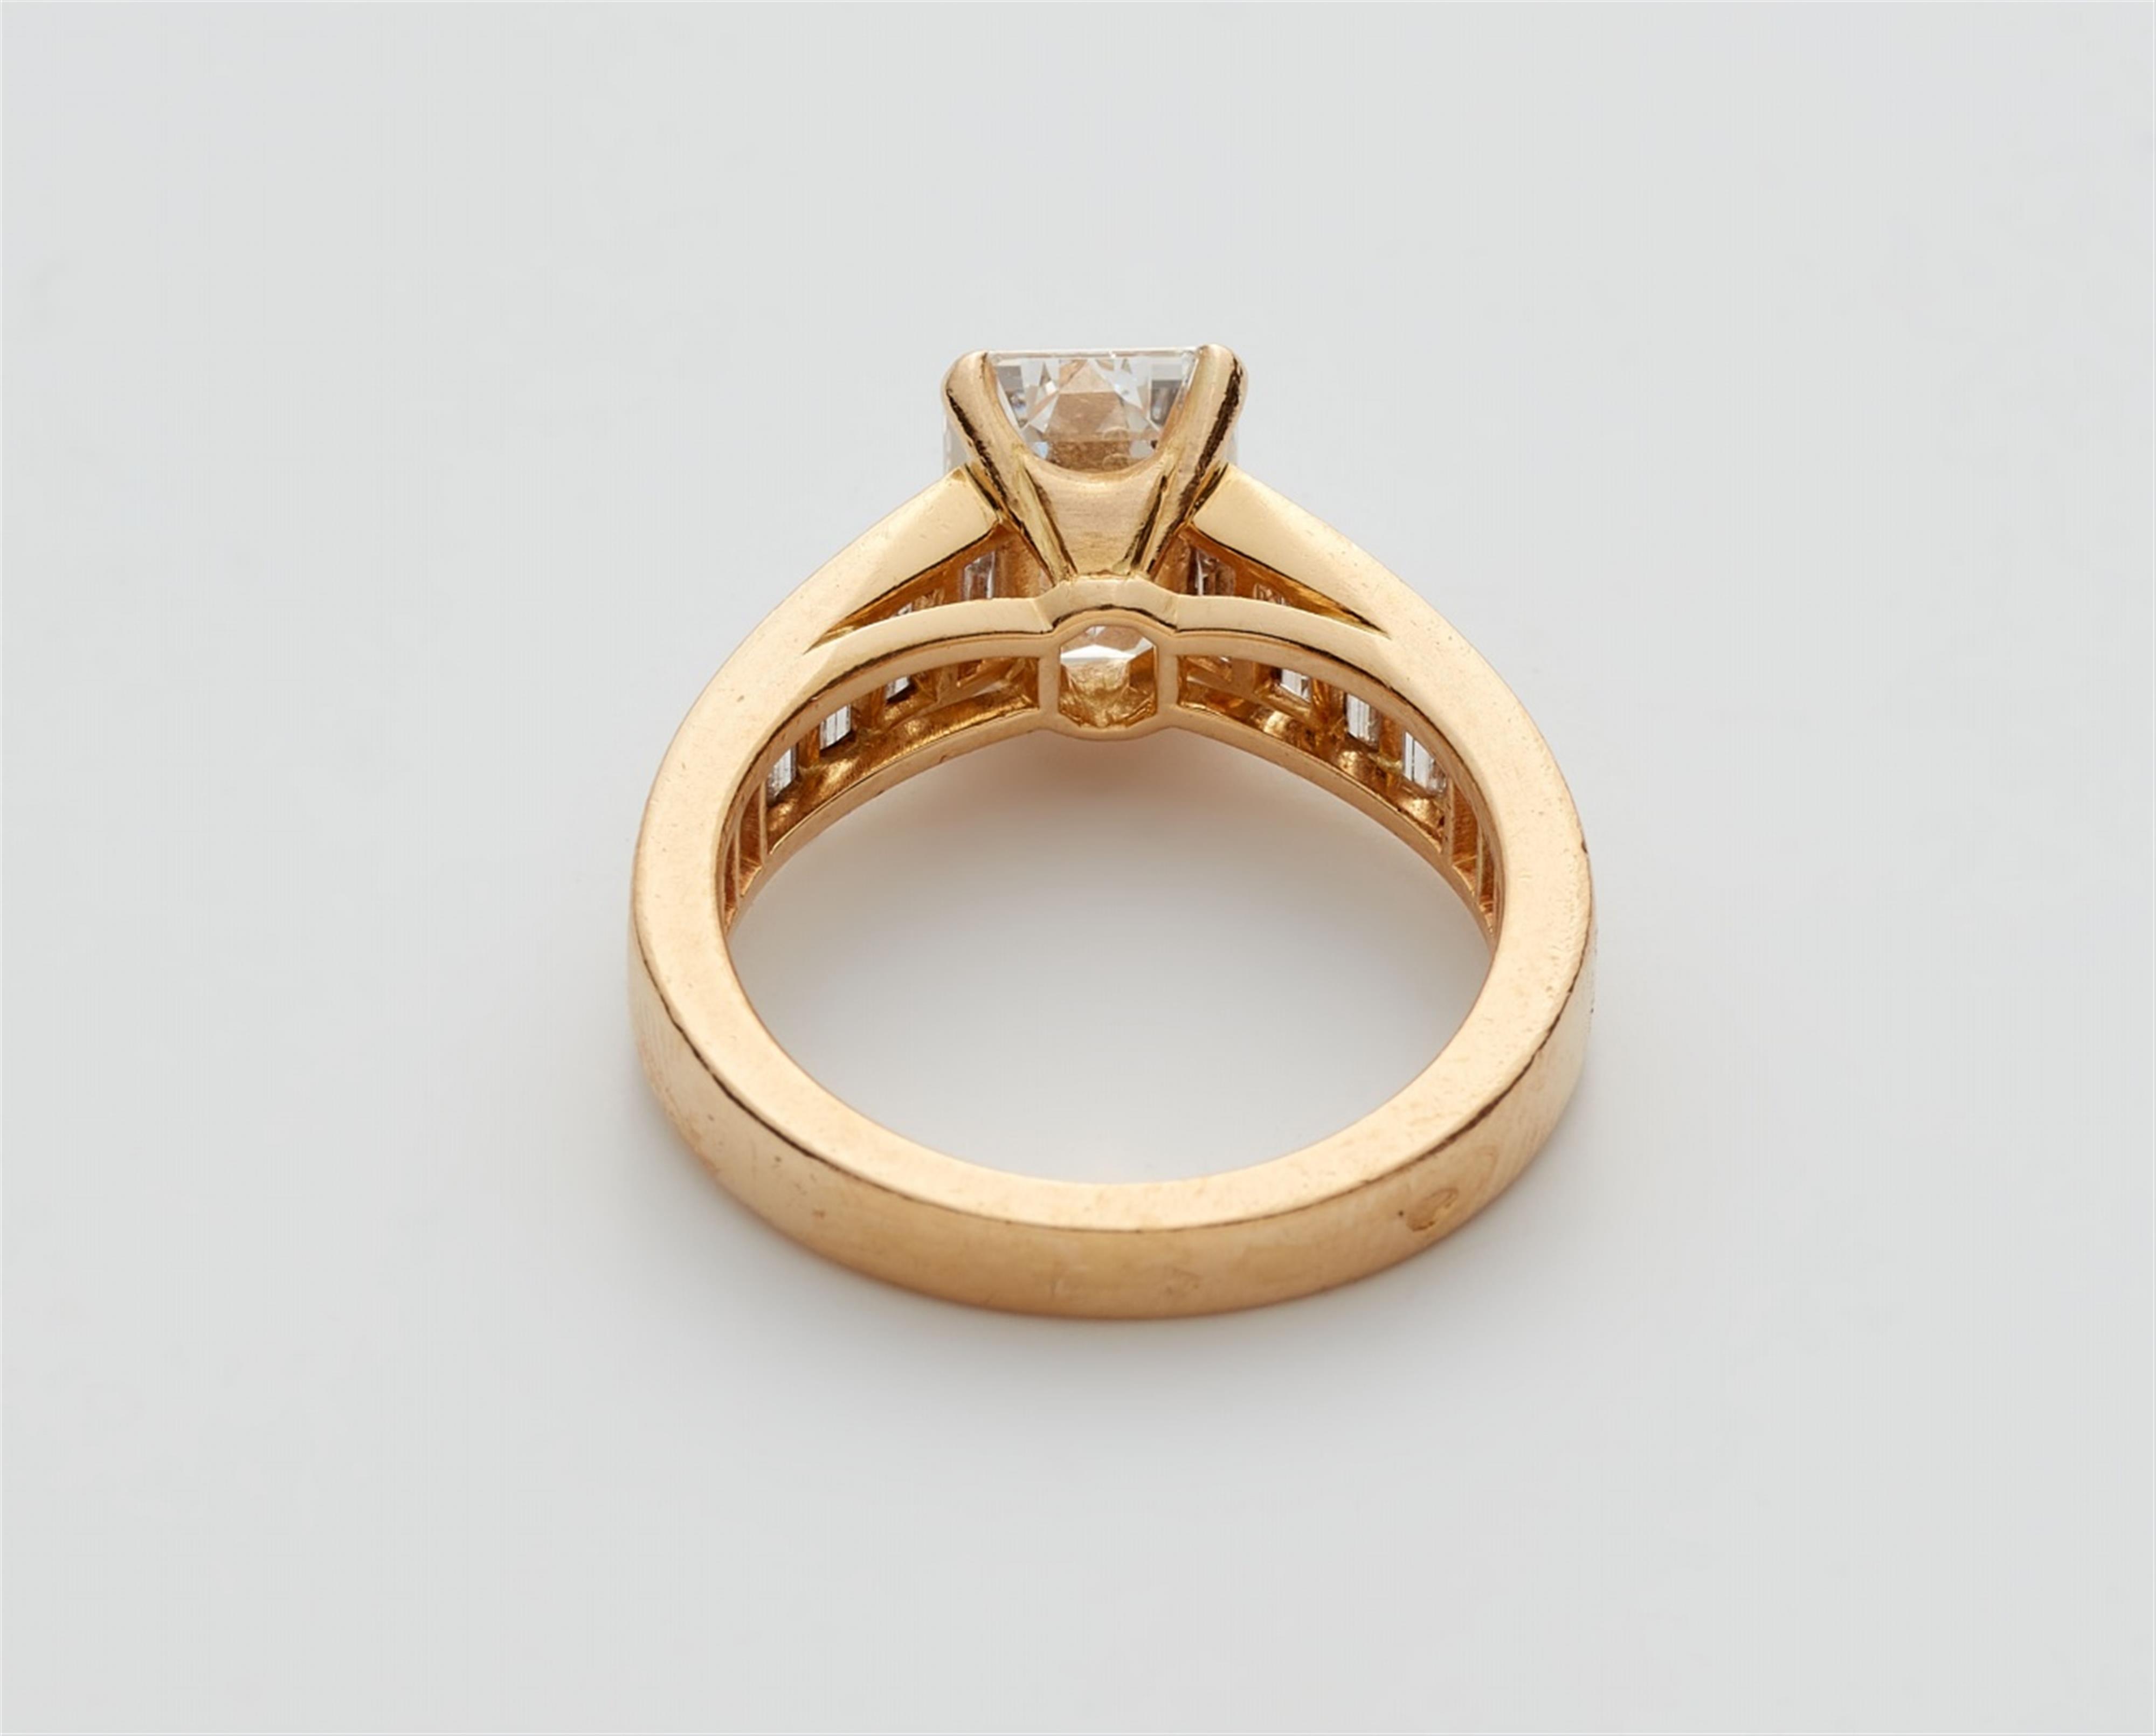 An 18k gold Cartier ring with an emerald-cut diamond solitaire - image-3